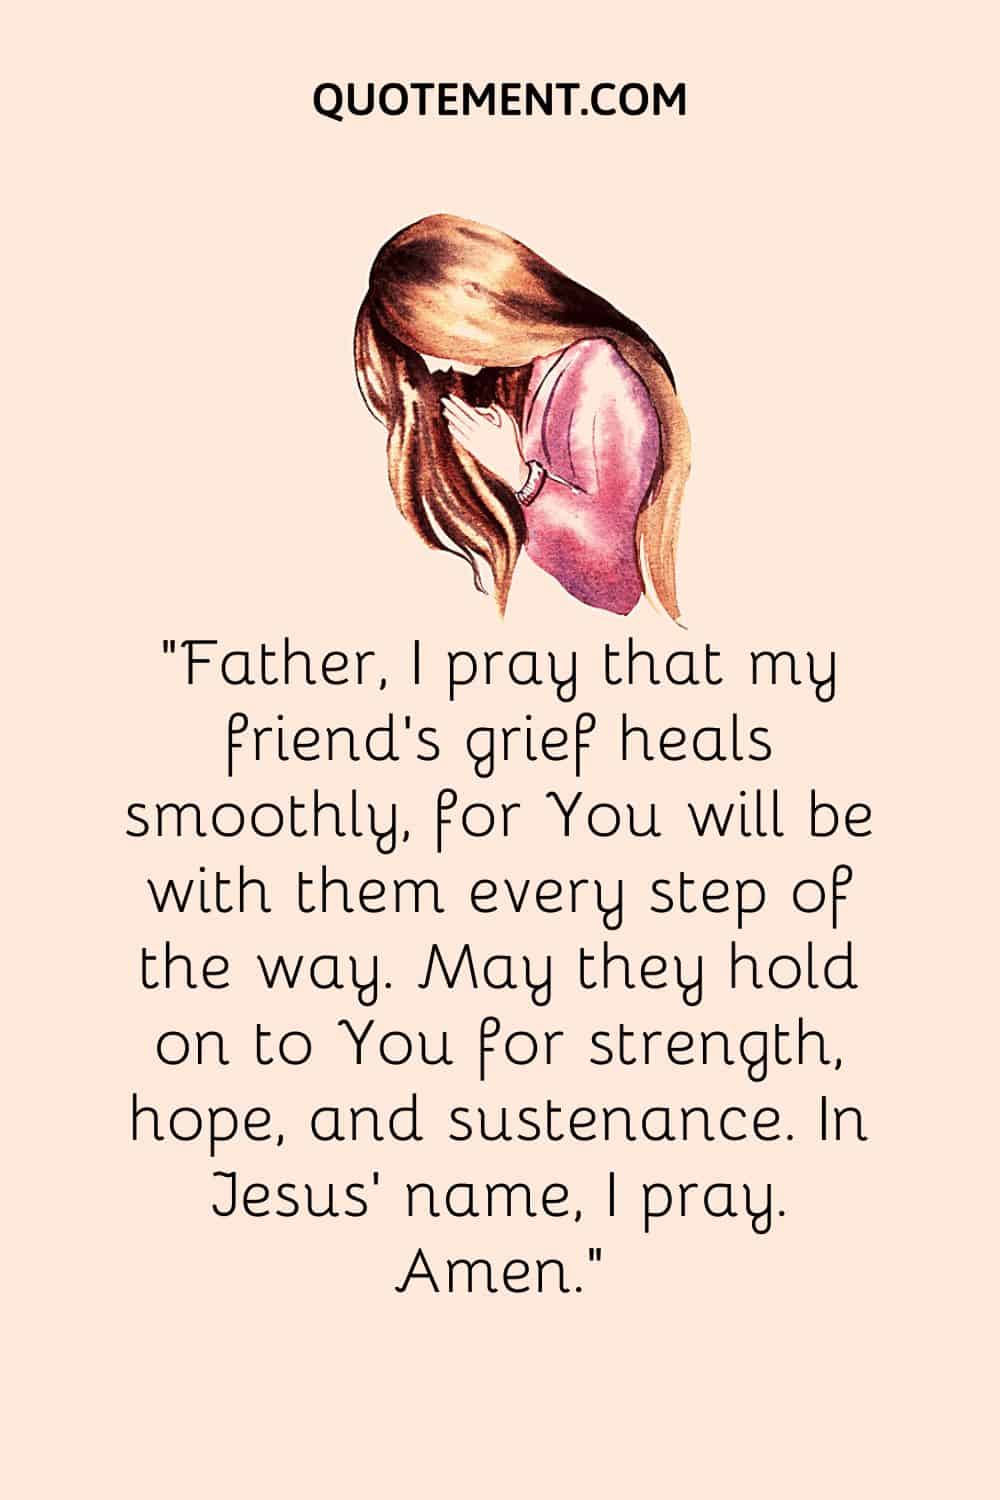 Best prayer to comfort a grieving friend and praying woman.